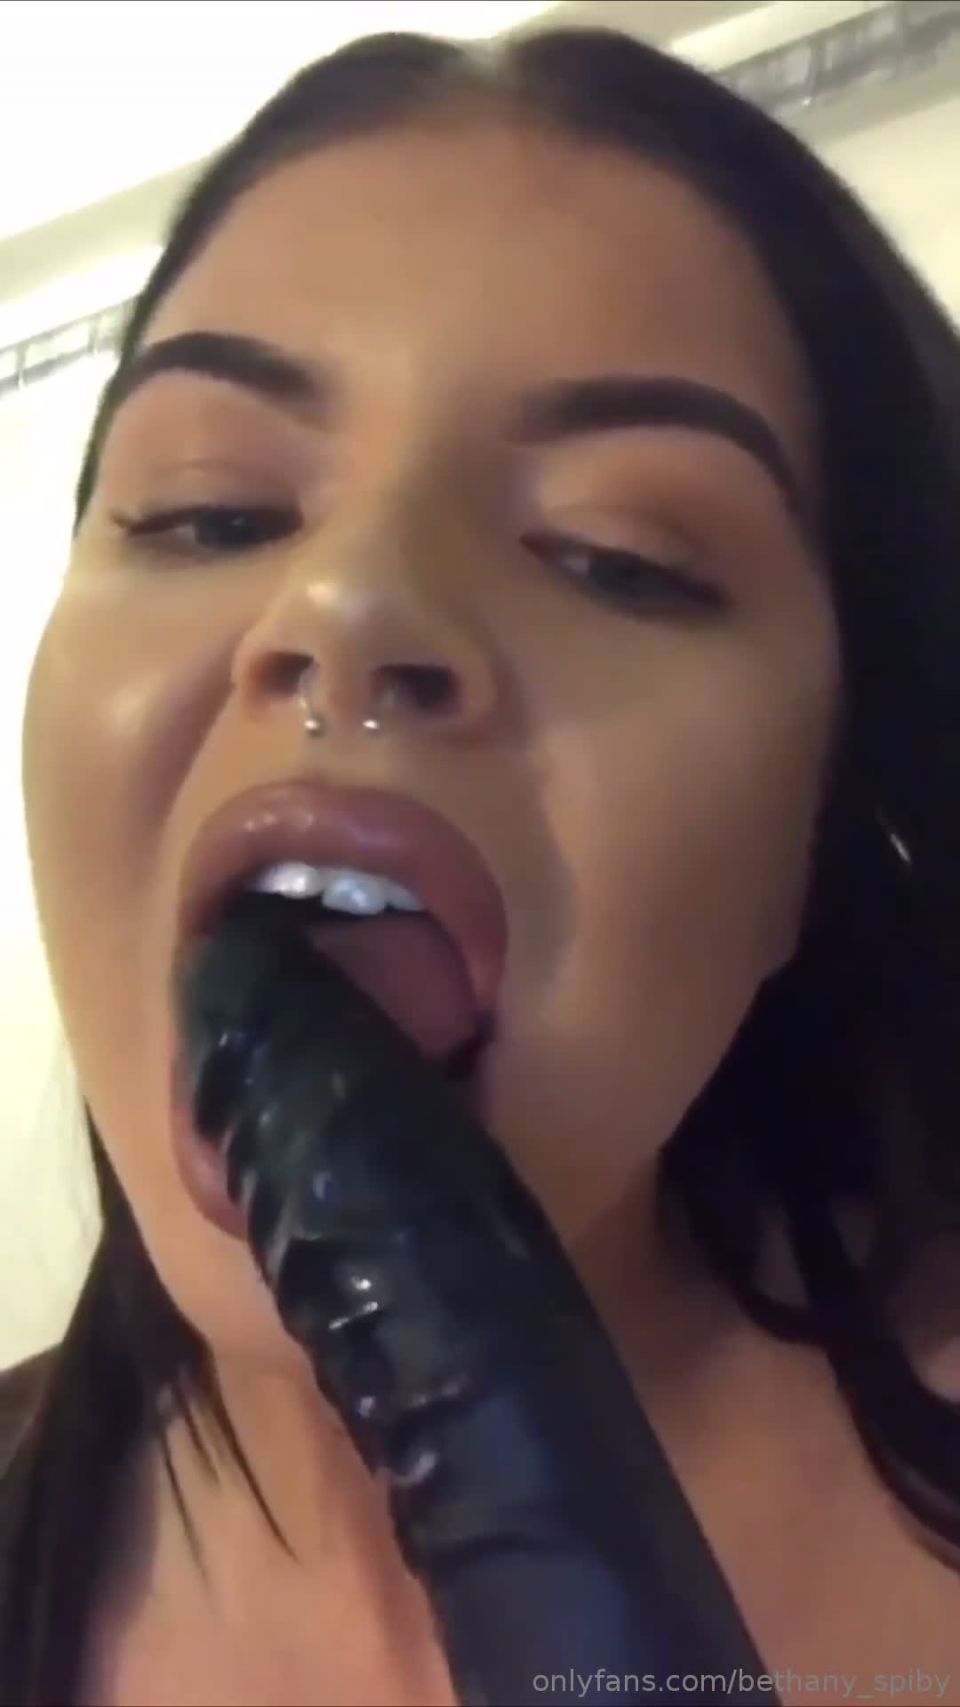 Bethany spiby () Bethanyspiby - how i clean my dirty dildos 28-01-2019